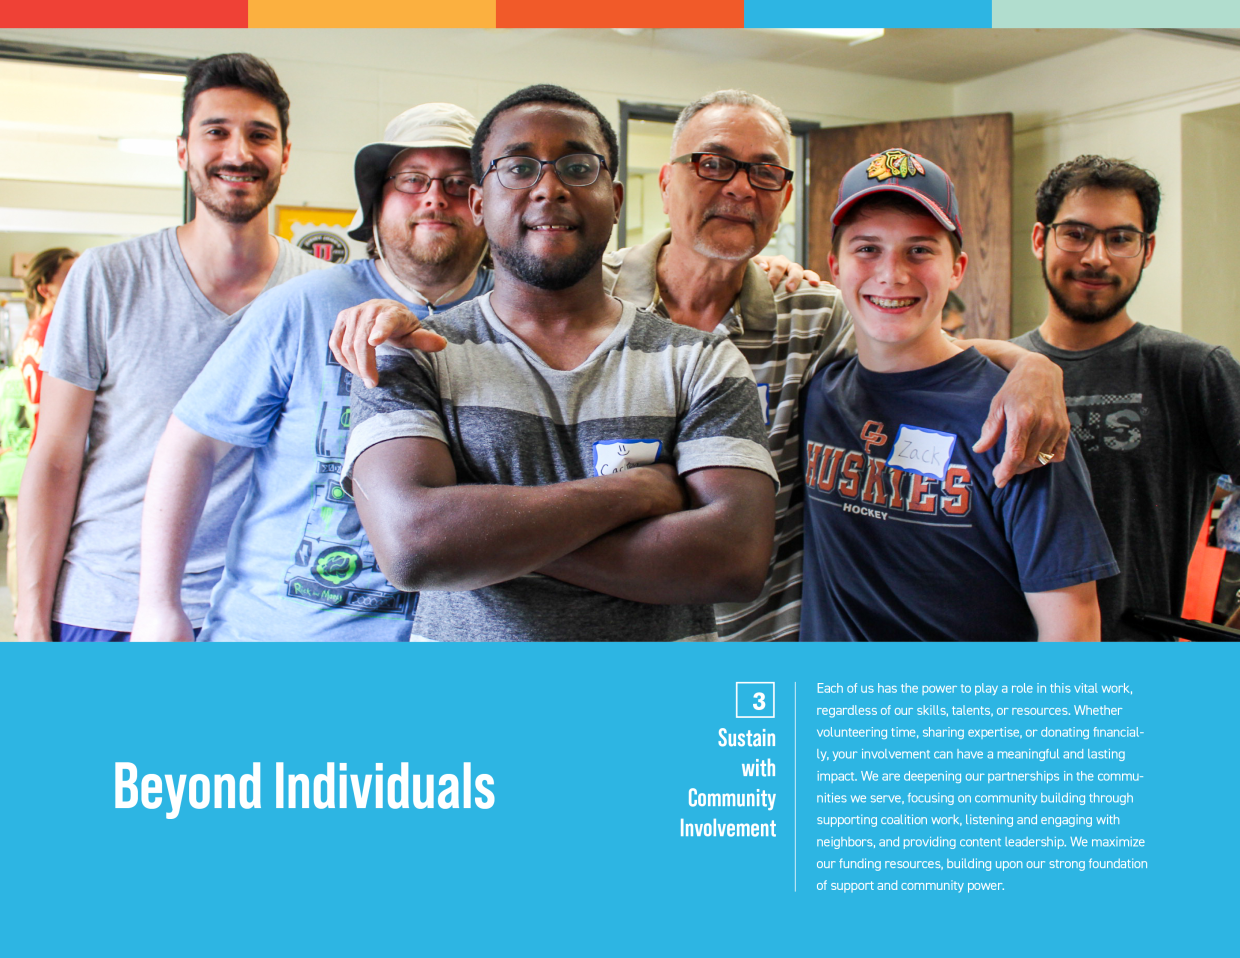 Beyond Individuals: Sustaining with Community Involvement